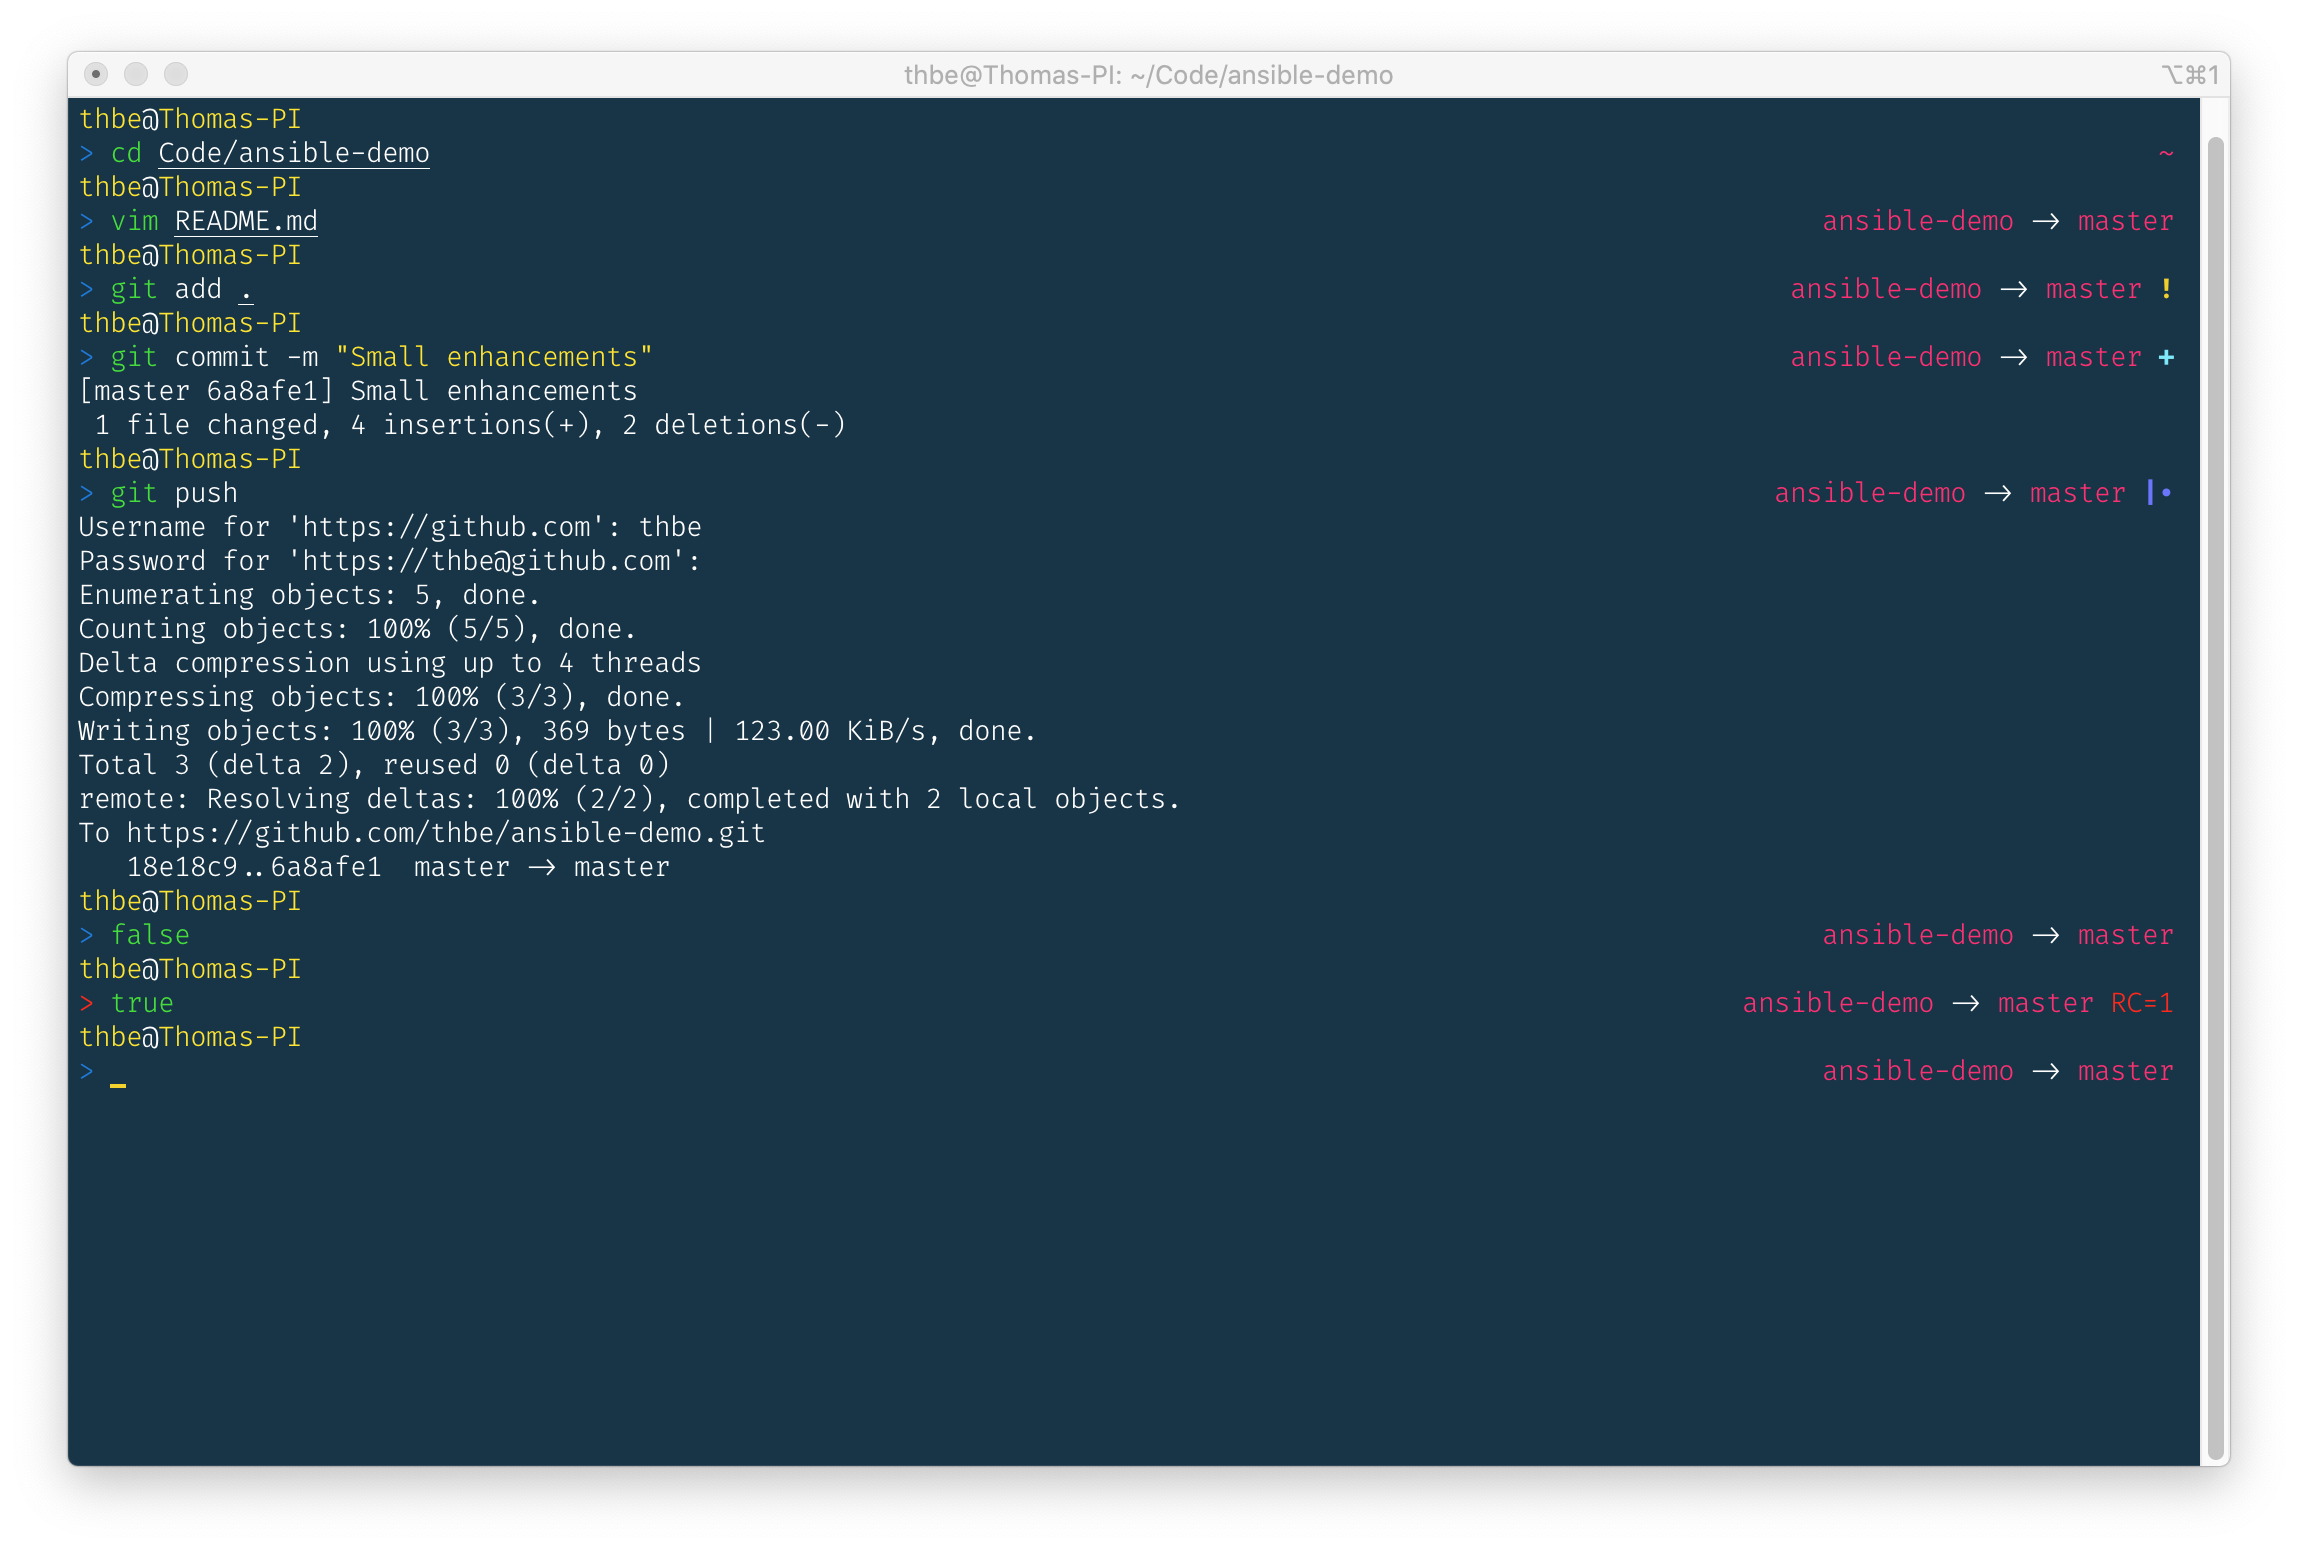 Customized lean Terminal with oh-my-zsh